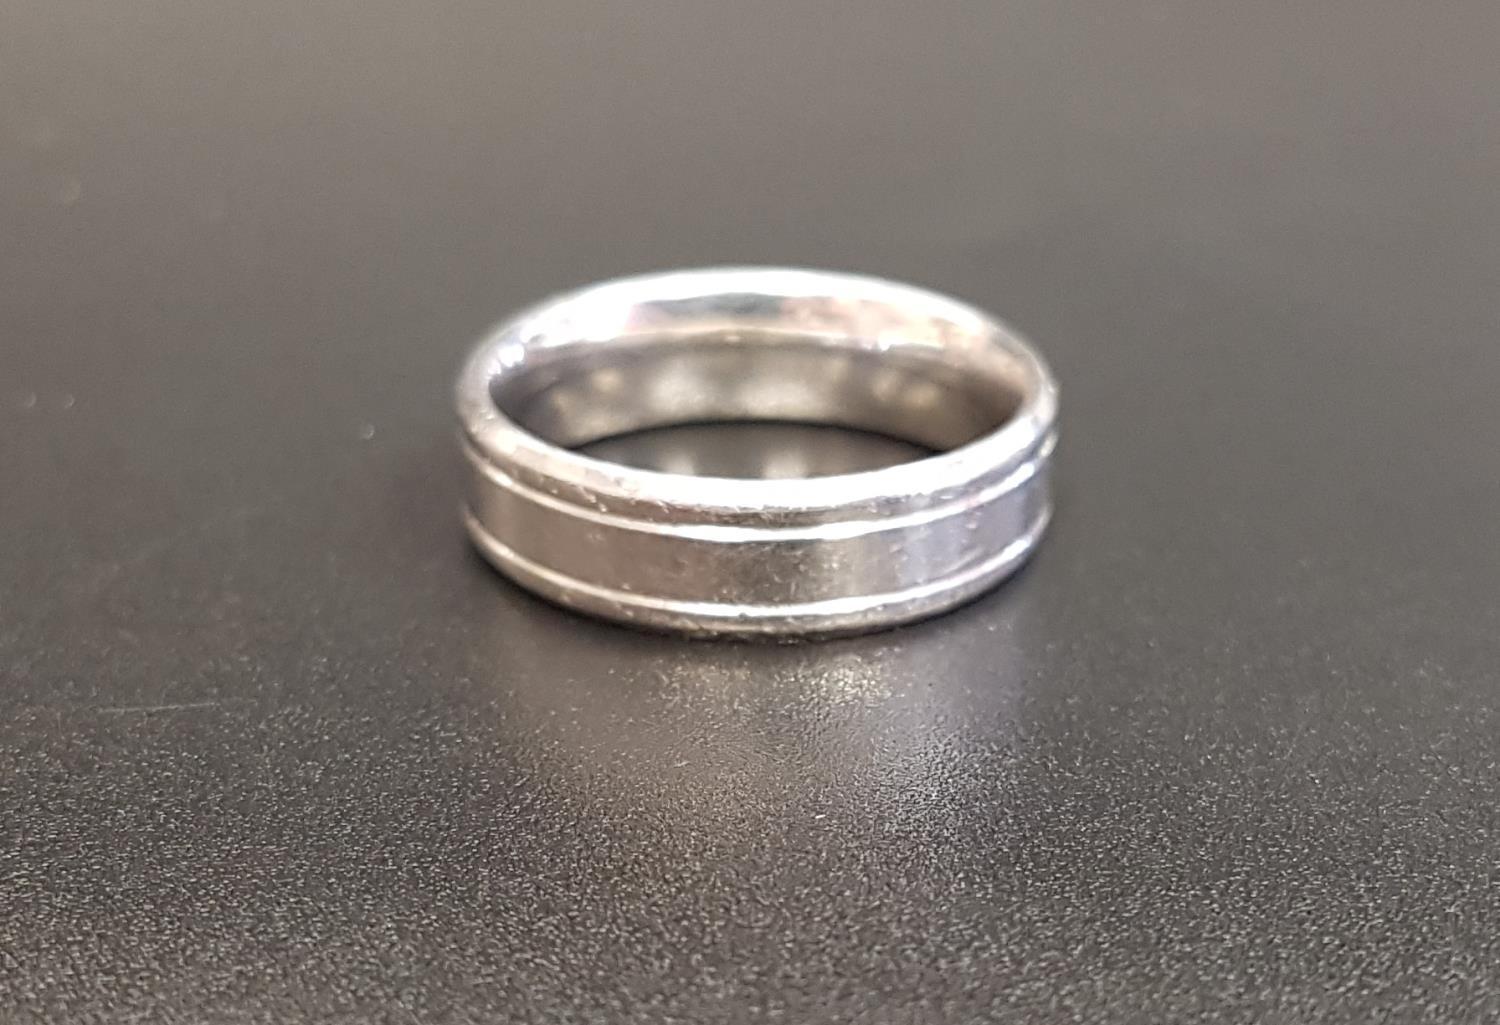 PLATINUM WEDDING BAND with engraved detail, ring size R-S and approximately 6.4 grams